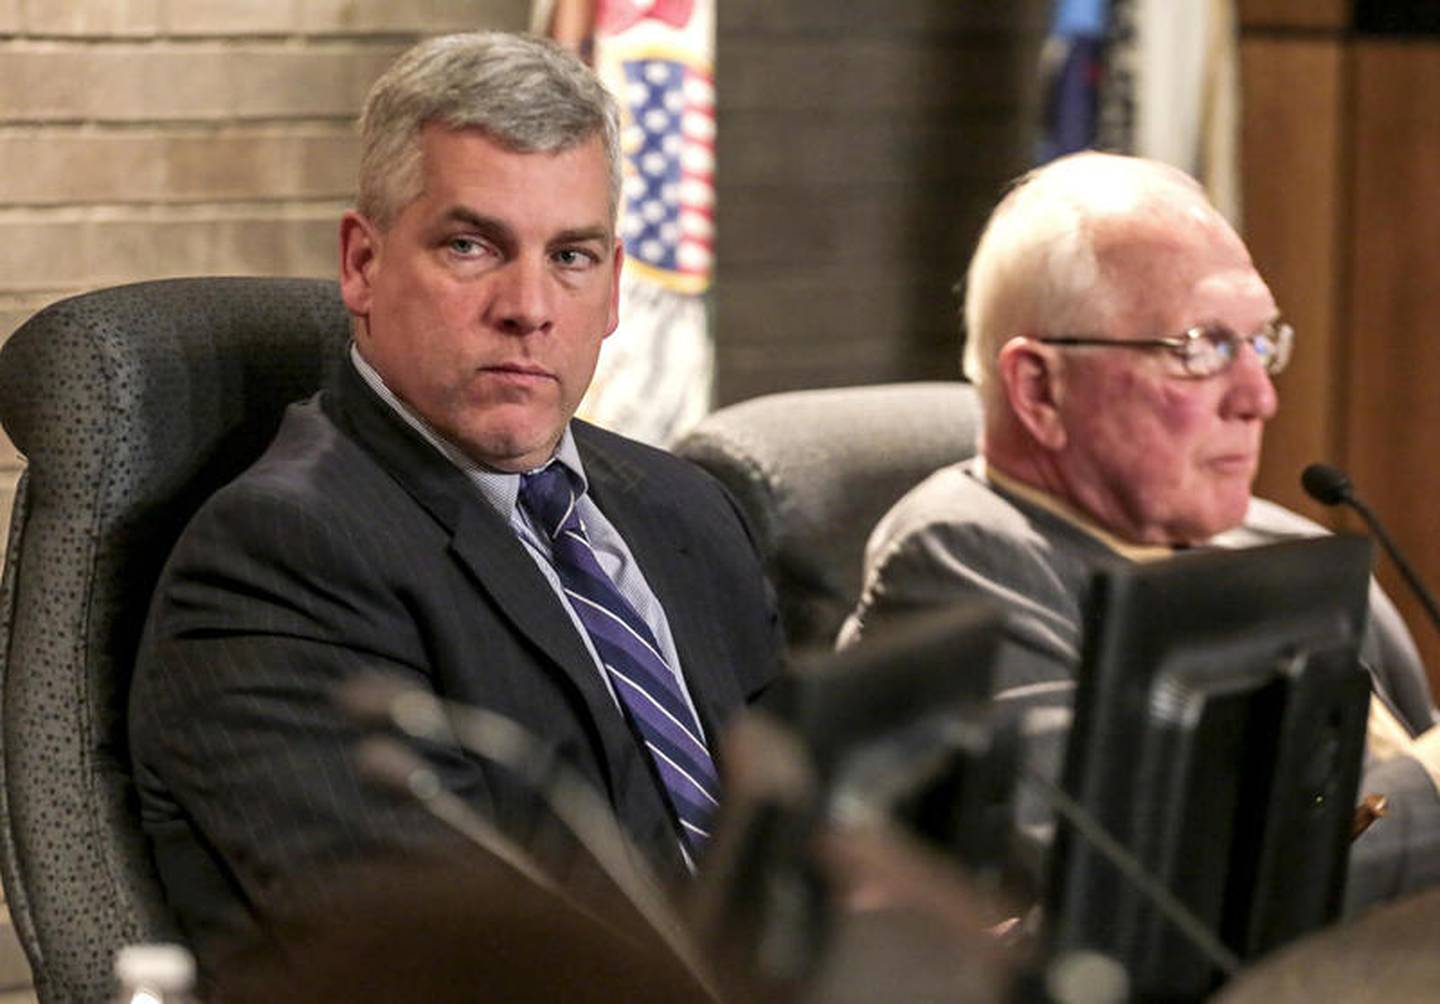 Joliet Mayor Bob O'Dekirk (left) and Councilman Pat Mudron, adversaries in disputes going back to  May 2019 over the city manager job, seen at a City Council meeting.